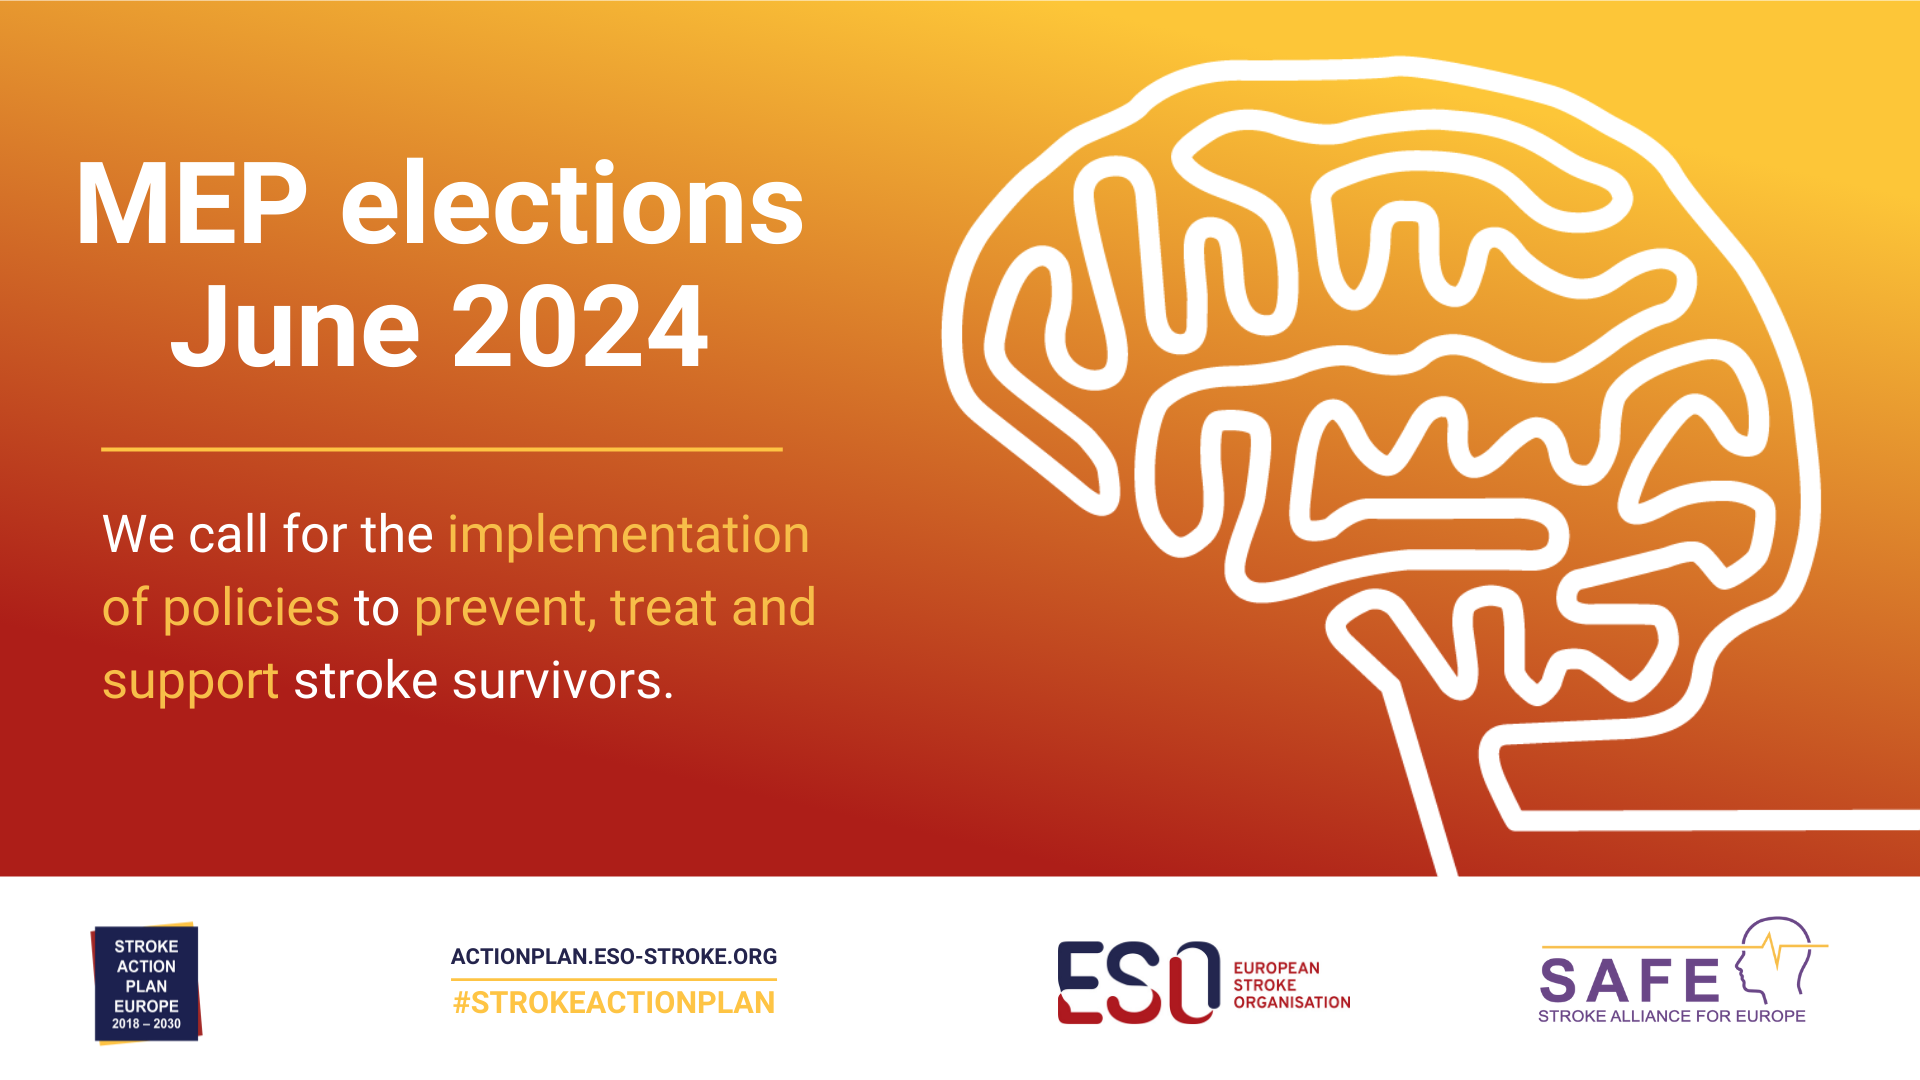 Prevent, treat and support: An EU election manifesto for stroke survivors